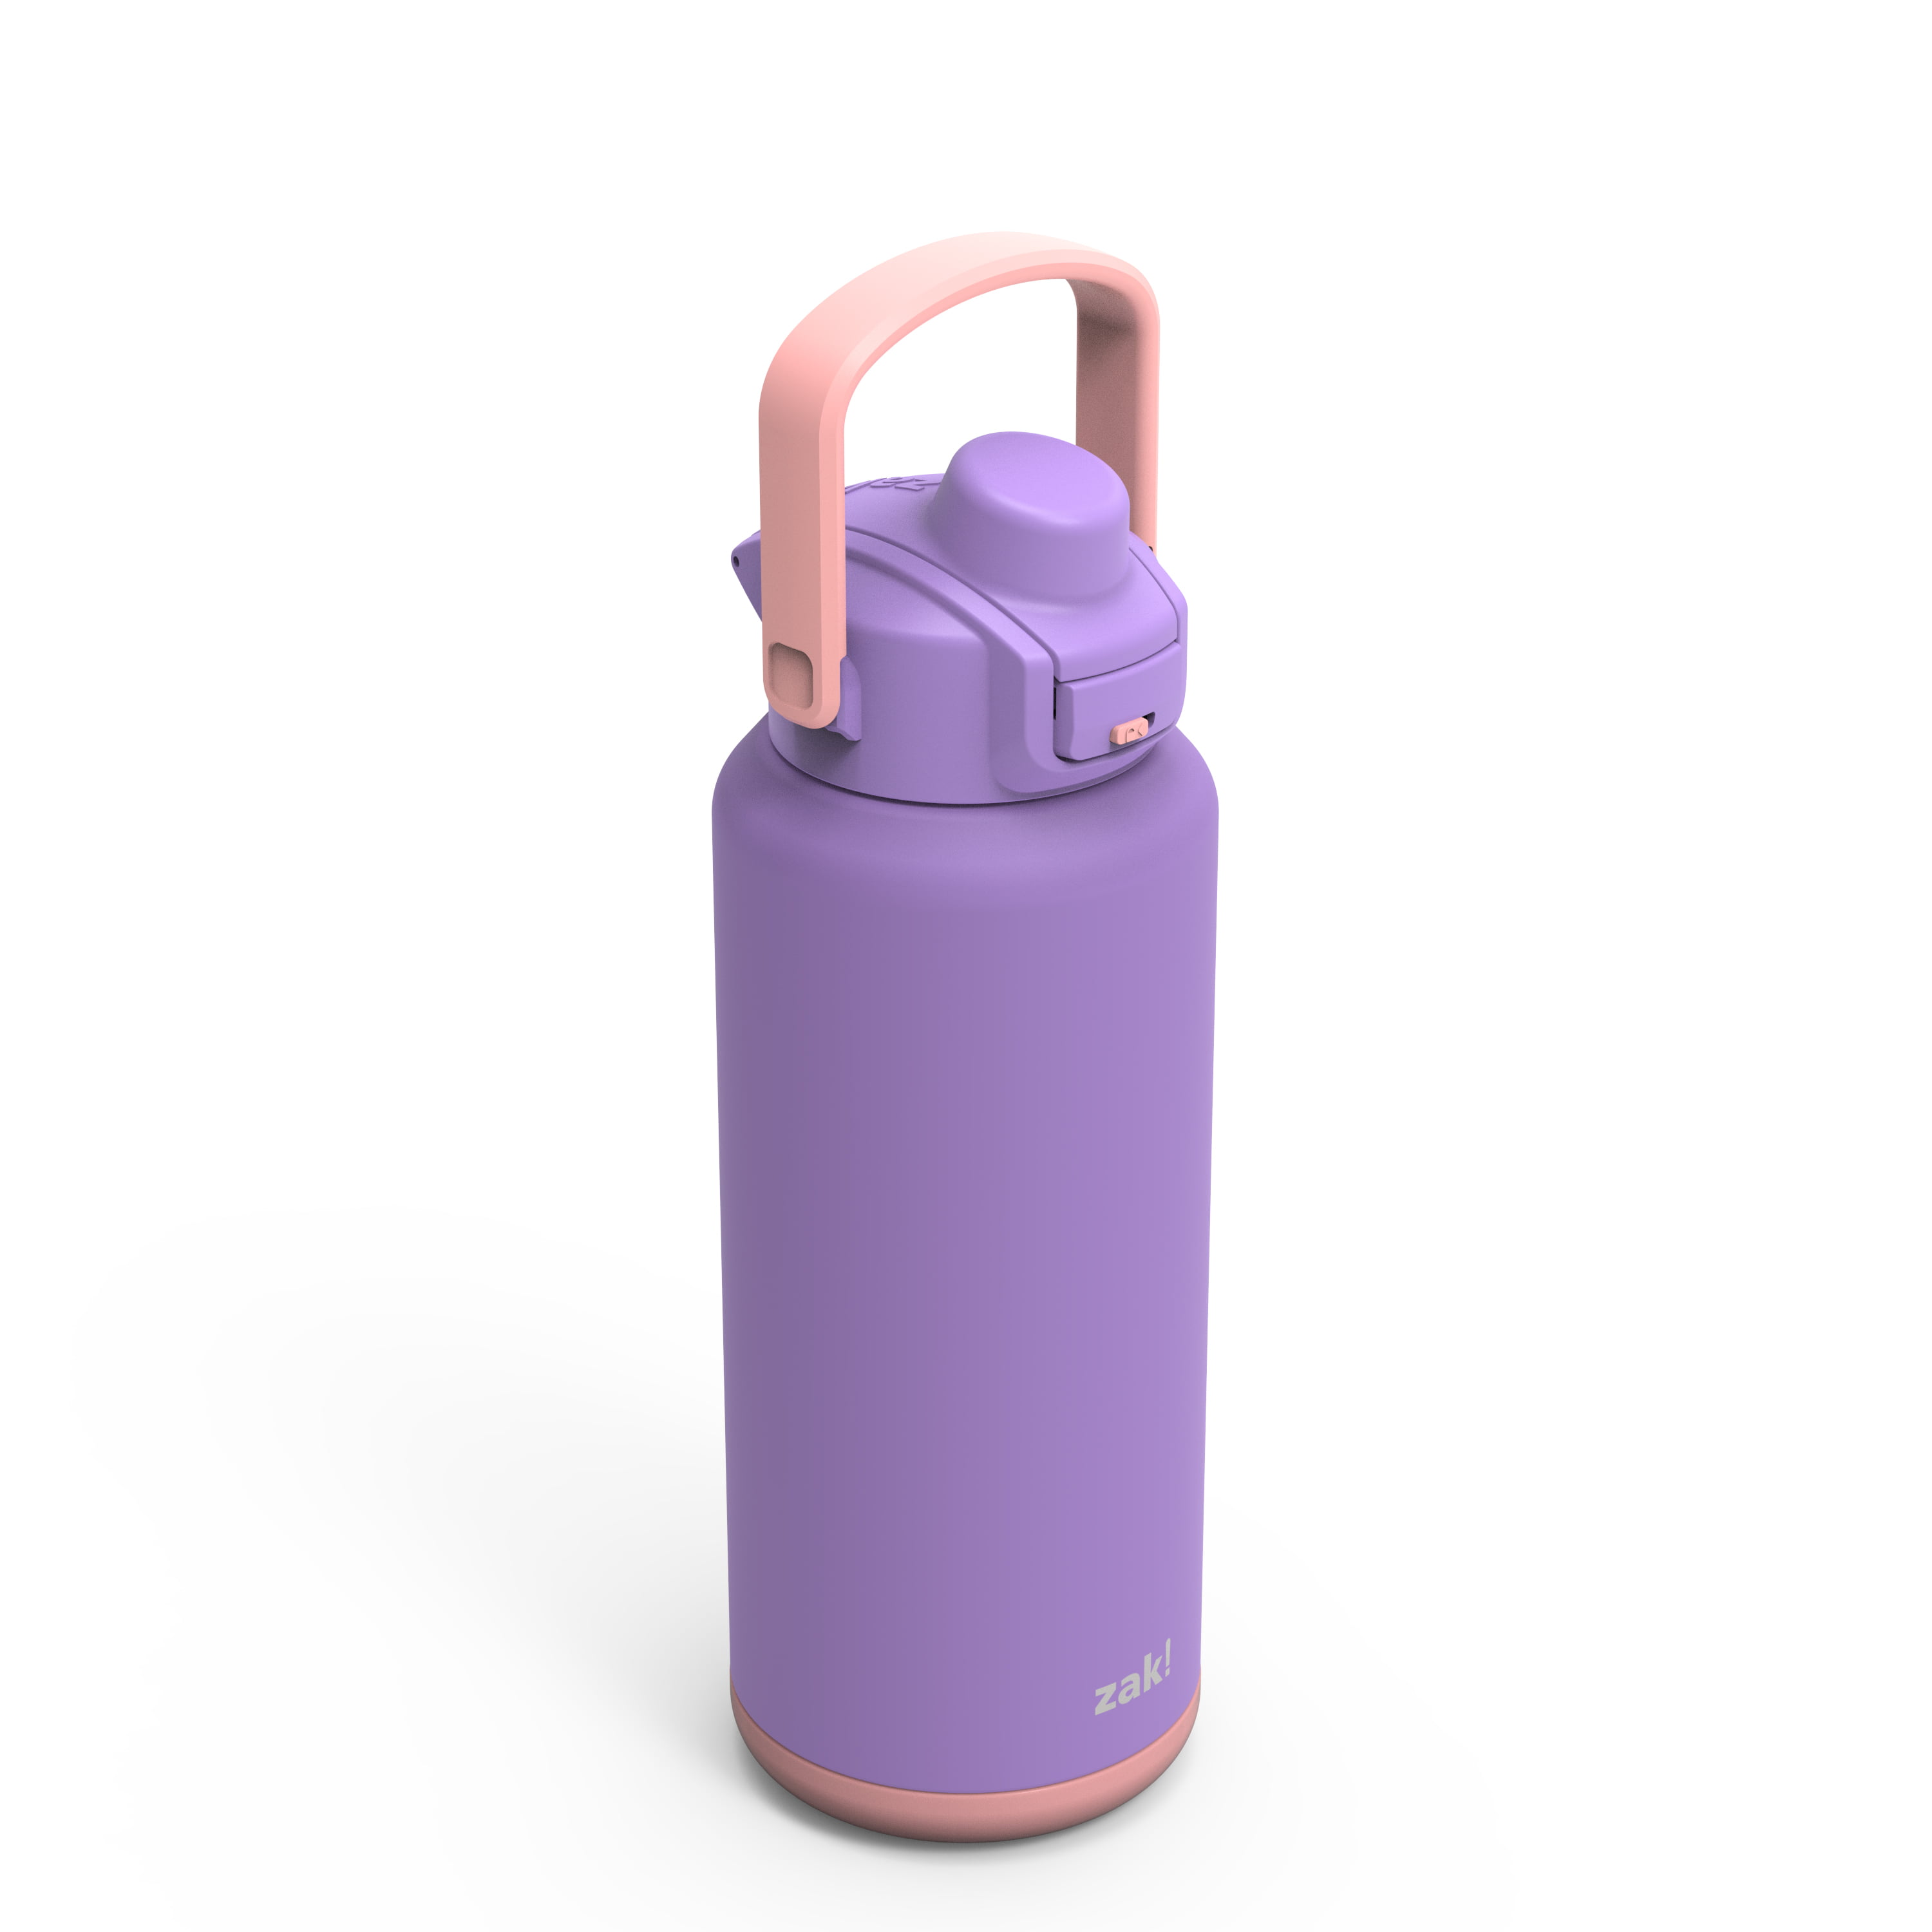 ZAK! Lilac Stainless Steel Double Wall Vacuum Bottle, 12 Oz.